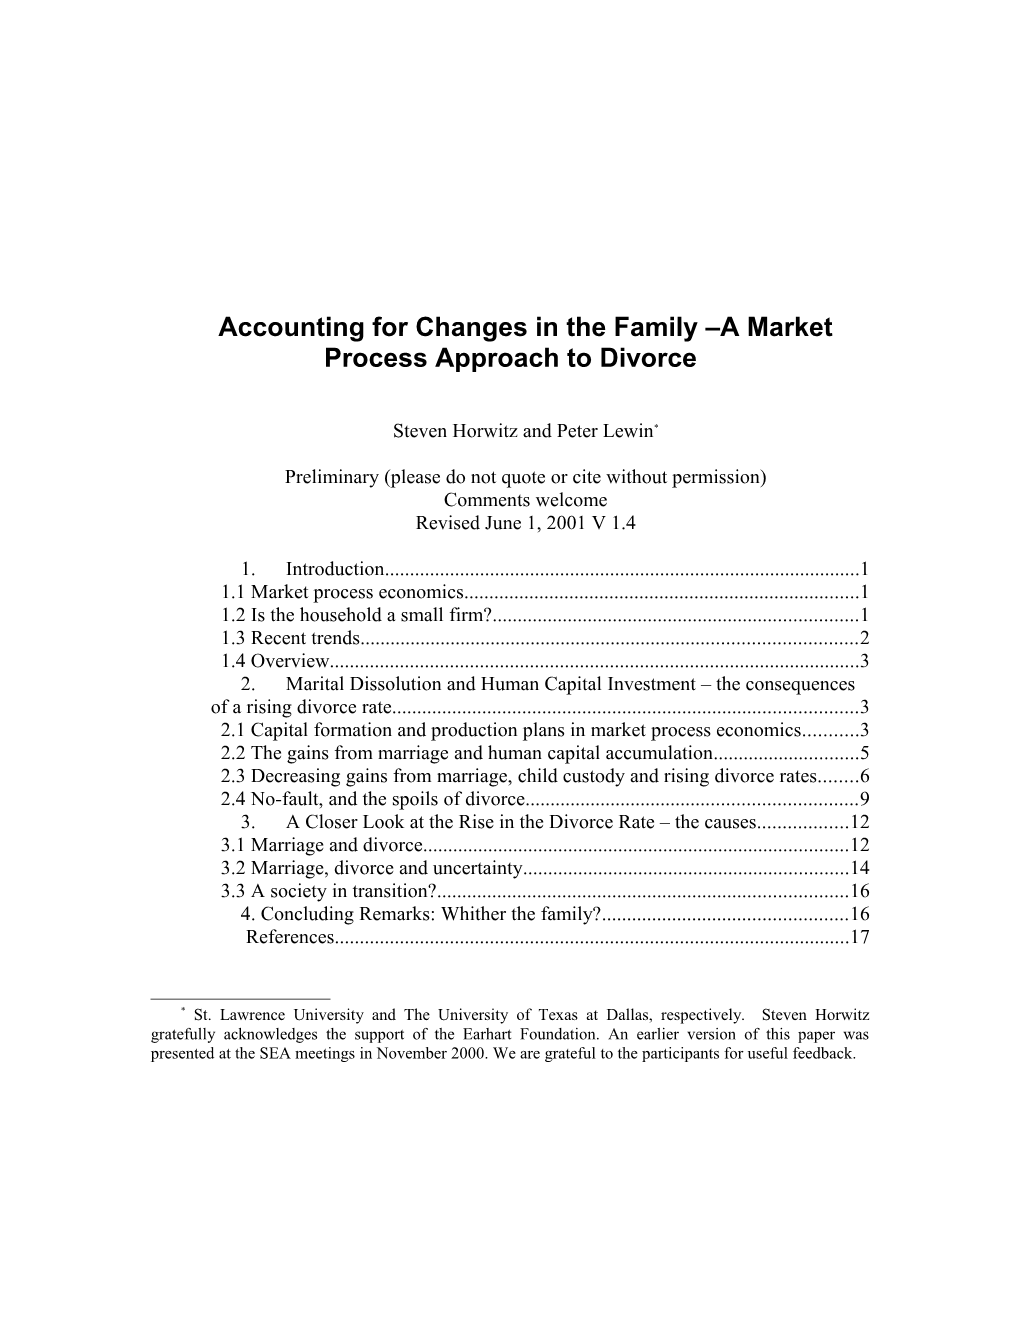 Accounting for Changes in the Family